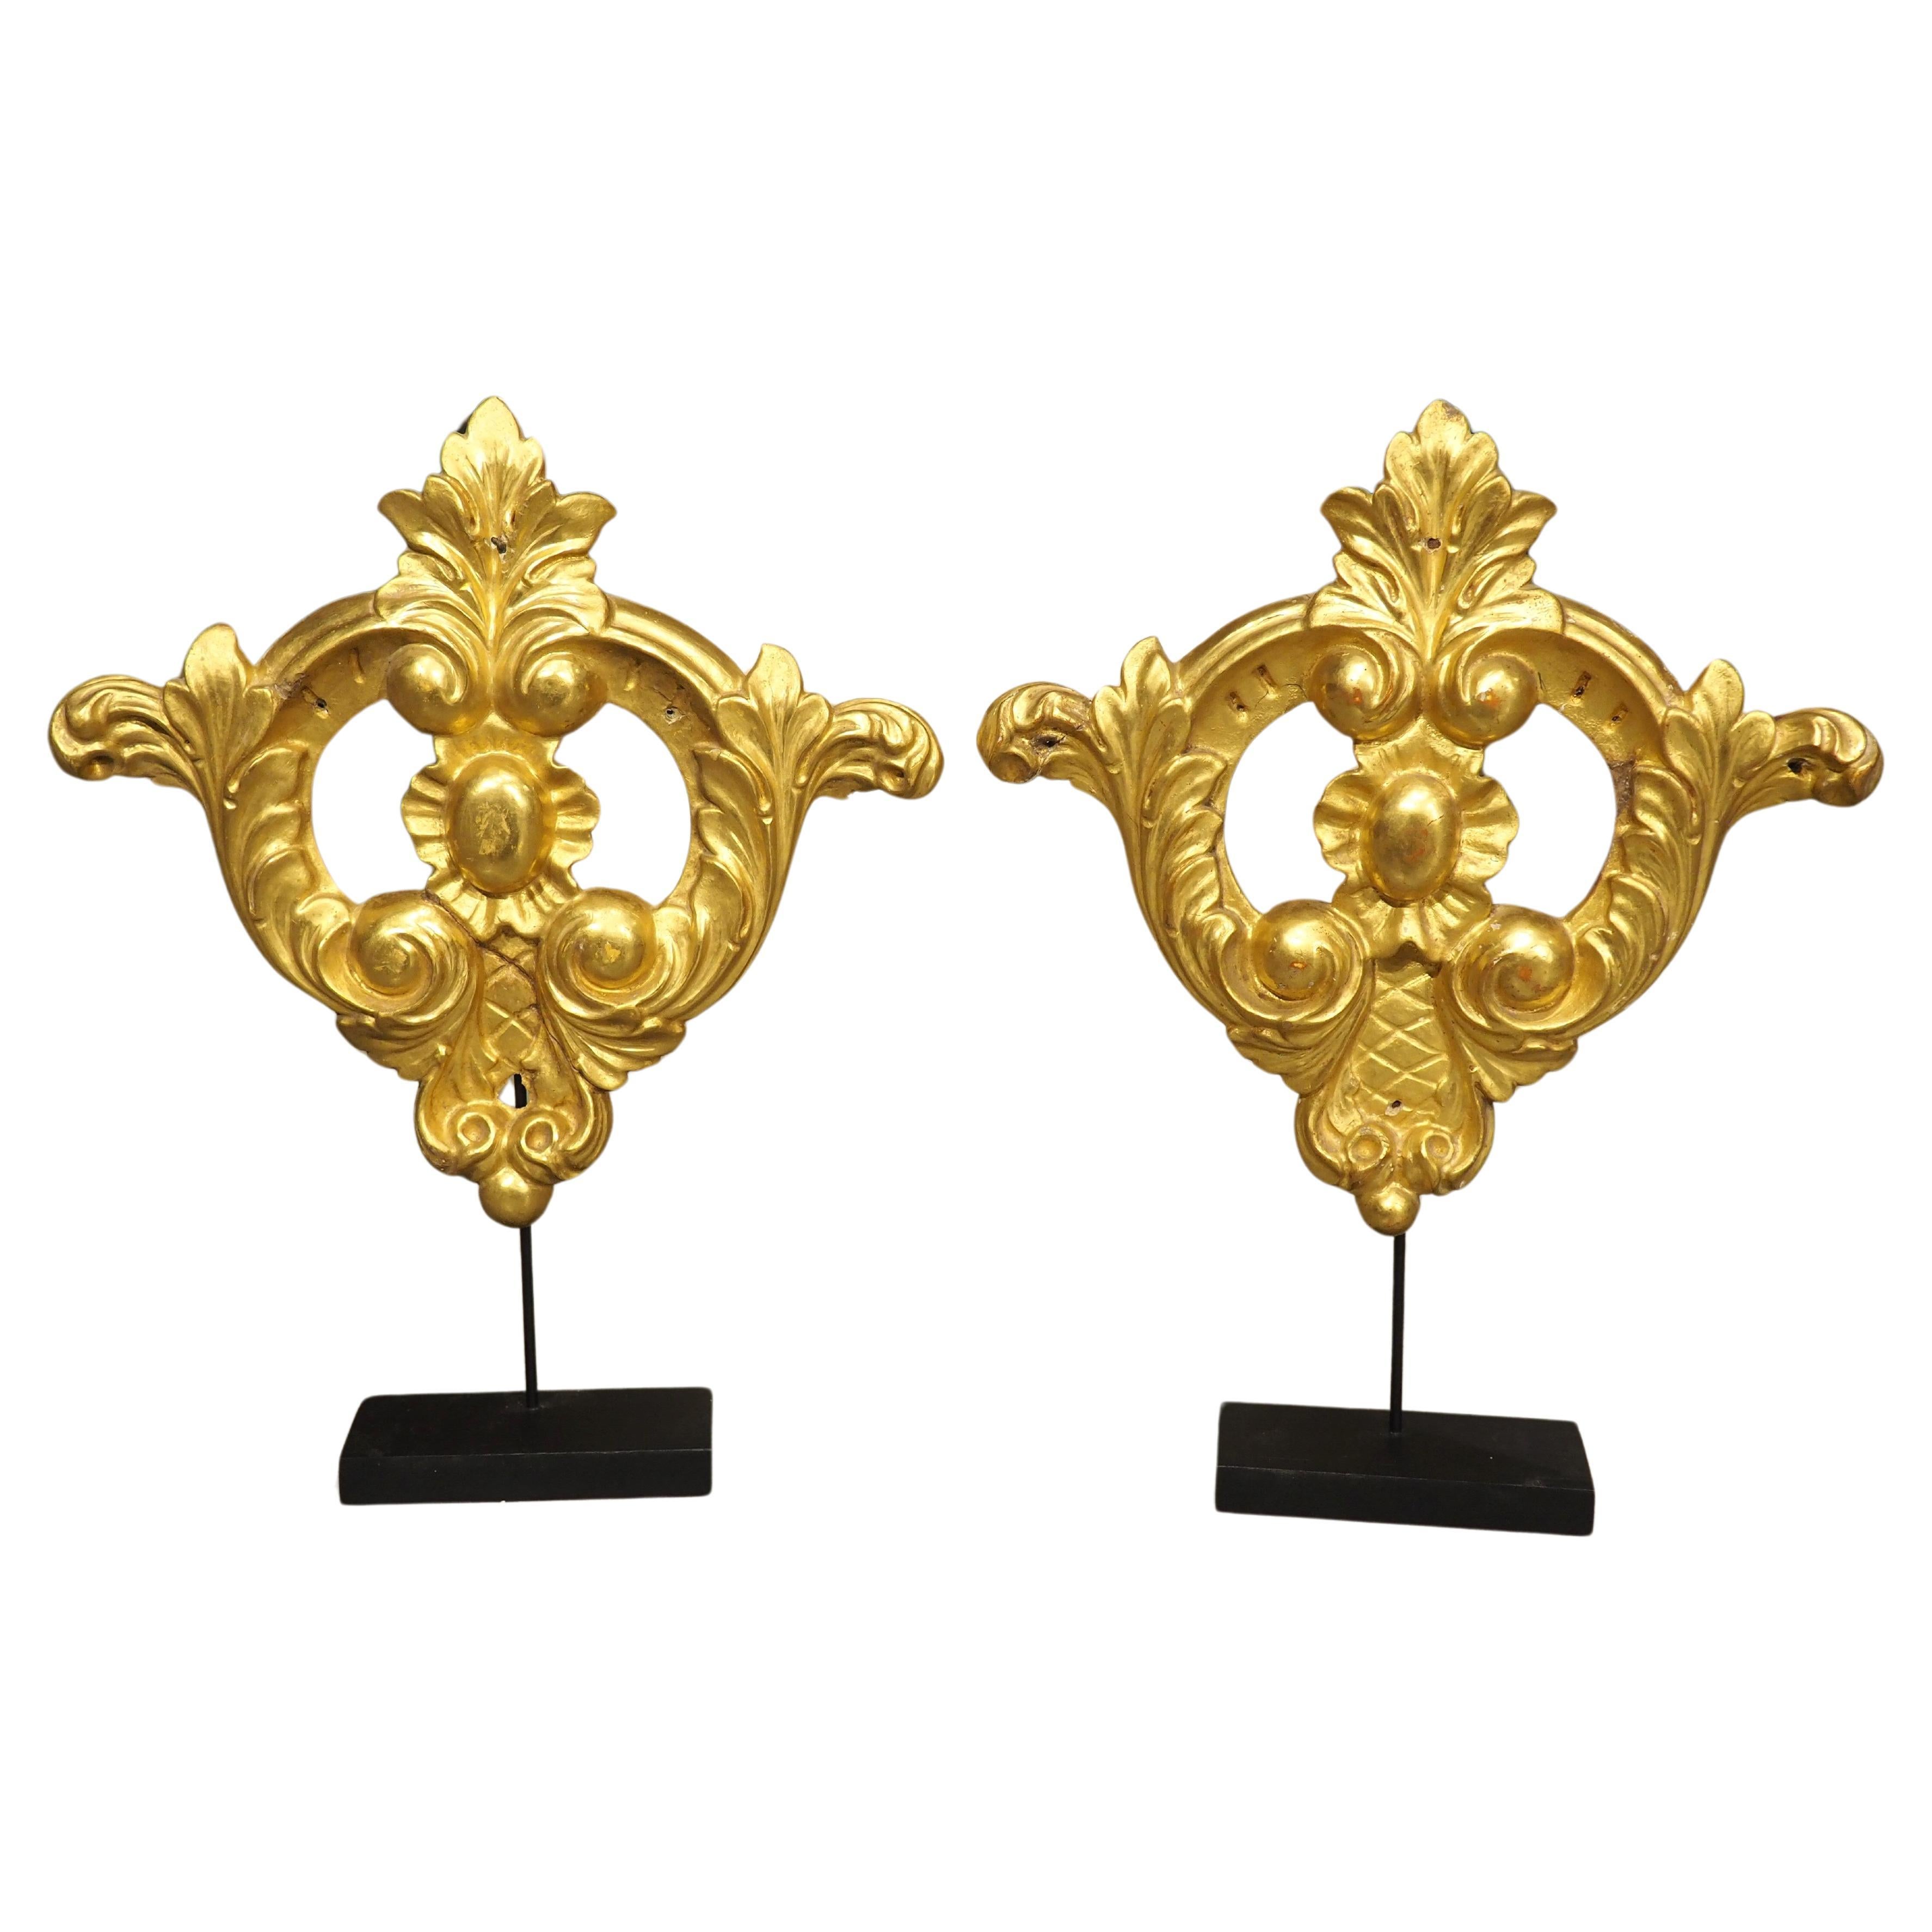 Pair Carved and Mounted Giltwood Ornaments, Italy C. 1850 For Sale